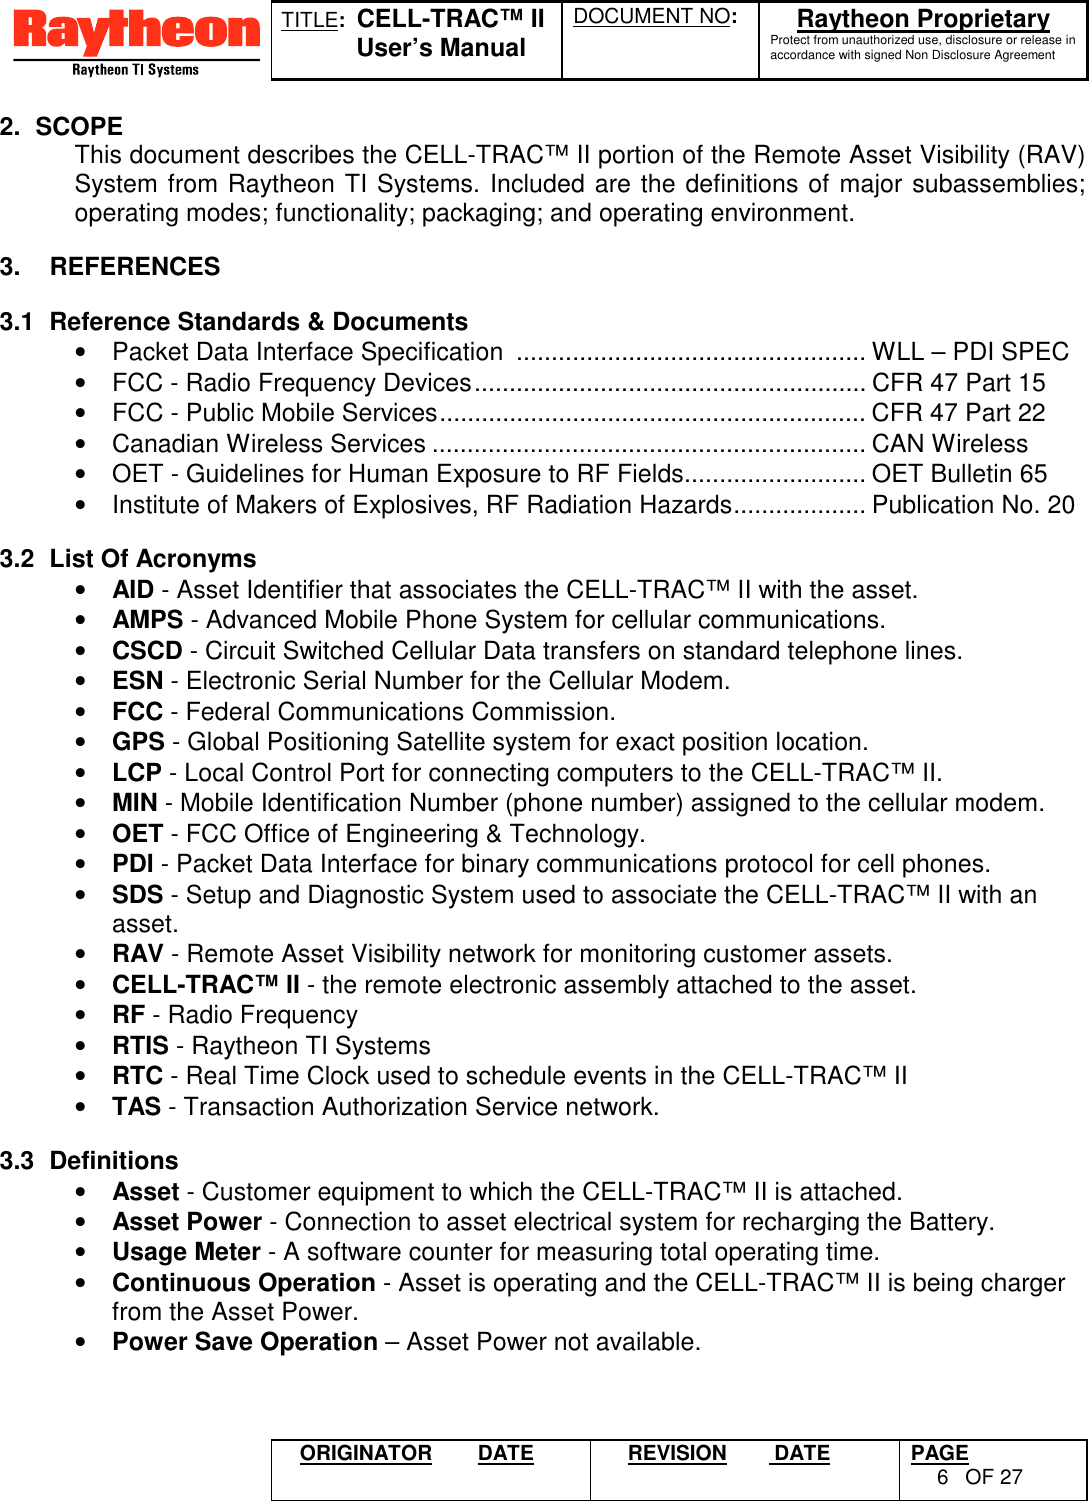 TITLE:  CELL-TRAC™ IIUser’s ManualDOCUMENT NO: Raytheon ProprietaryProtect from unauthorized use, disclosure or release inaccordance with signed Non Disclosure AgreementORIGINATOR DATE REVISION  DATE PAGE6OF 272. SCOPEThis document describes the CELL-TRAC™ II portion of the Remote Asset Visibility (RAV)System from Raytheon TI Systems. Included are the definitions of major subassemblies;operating modes; functionality; packaging; and operating environment.3.    REFERENCES3.1  Reference Standards &amp; Documents•  Packet Data Interface Specification  .................................................. WLL – PDI SPEC•  FCC - Radio Frequency Devices........................................................ CFR 47 Part 15•  FCC - Public Mobile Services............................................................. CFR 47 Part 22•  Canadian Wireless Services .............................................................. CAN Wireless•  OET - Guidelines for Human Exposure to RF Fields.......................... OET Bulletin 65•  Institute of Makers of Explosives, RF Radiation Hazards................... Publication No. 203.2  List Of Acronyms• AID - Asset Identifier that associates the CELL-TRAC™ II with the asset.• AMPS - Advanced Mobile Phone System for cellular communications.• CSCD - Circuit Switched Cellular Data transfers on standard telephone lines.• ESN - Electronic Serial Number for the Cellular Modem.• FCC - Federal Communications Commission.• GPS - Global Positioning Satellite system for exact position location.• LCP - Local Control Port for connecting computers to the CELL-TRAC™ II.• MIN - Mobile Identification Number (phone number) assigned to the cellular modem.• OET - FCC Office of Engineering &amp; Technology.• PDI - Packet Data Interface for binary communications protocol for cell phones.• SDS - Setup and Diagnostic System used to associate the CELL-TRAC™ II with anasset.• RAV - Remote Asset Visibility network for monitoring customer assets.• CELL-TRAC™ II - the remote electronic assembly attached to the asset.• RF - Radio Frequency• RTIS - Raytheon TI Systems• RTC - Real Time Clock used to schedule events in the CELL-TRAC™ II• TAS - Transaction Authorization Service network.3.3 Definitions• Asset - Customer equipment to which the CELL-TRAC™ II is attached.• Asset Power - Connection to asset electrical system for recharging the Battery.• Usage Meter - A software counter for measuring total operating time.• Continuous Operation - Asset is operating and the CELL-TRAC™ II is being chargerfrom the Asset Power.• Power Save Operation – Asset Power not available.